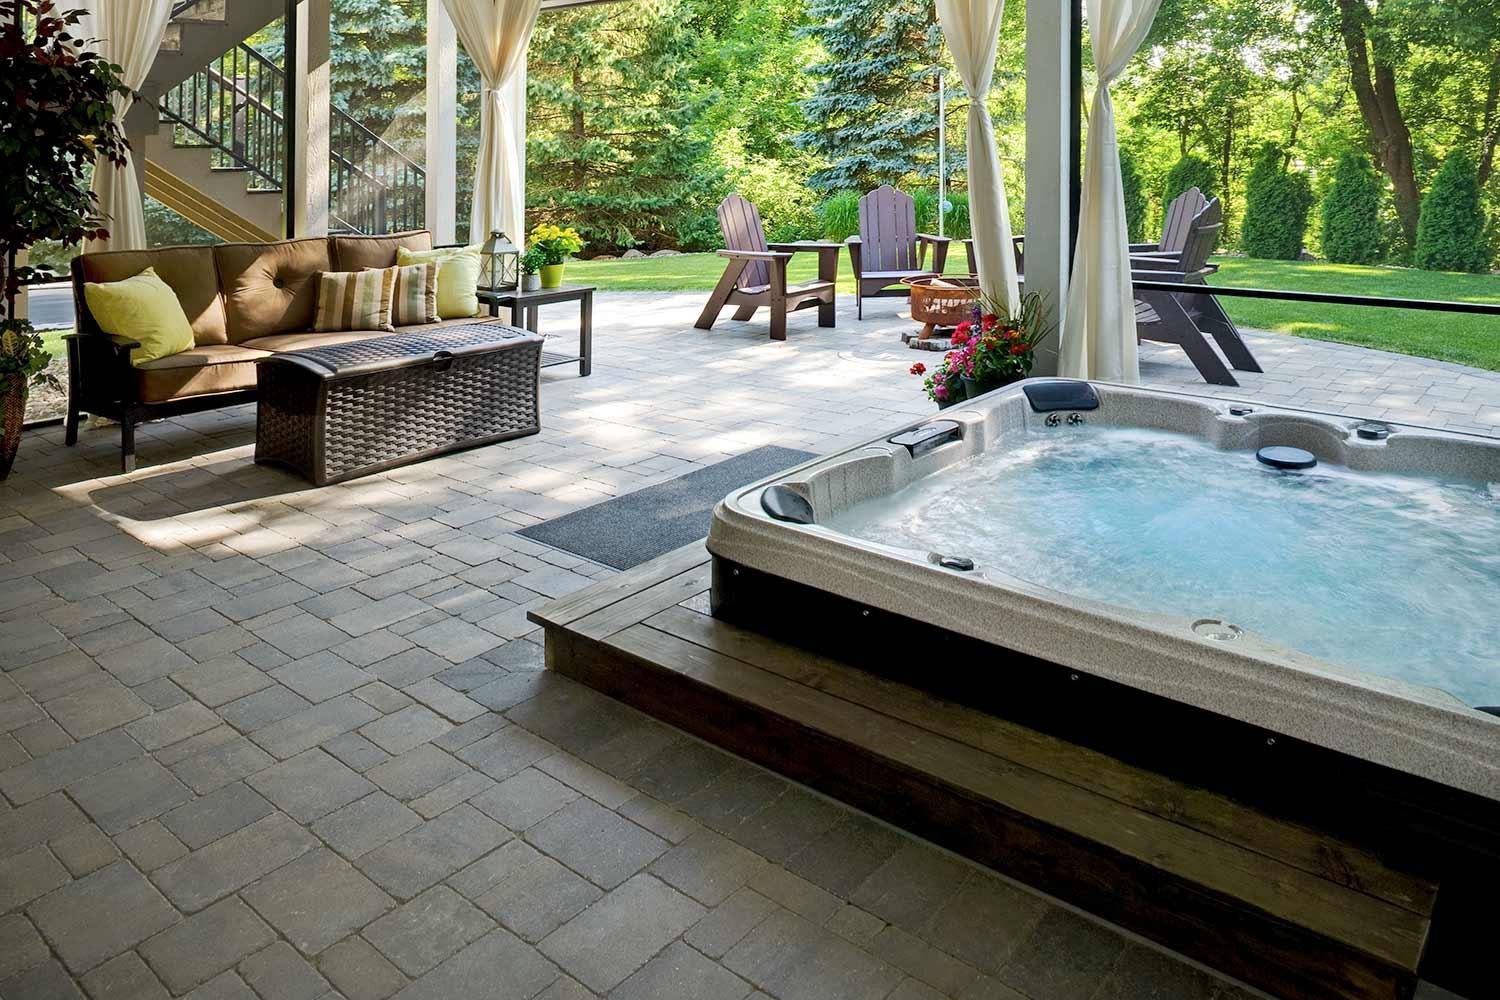 sunked hot tub and outdoor living room with bug screens and curtains